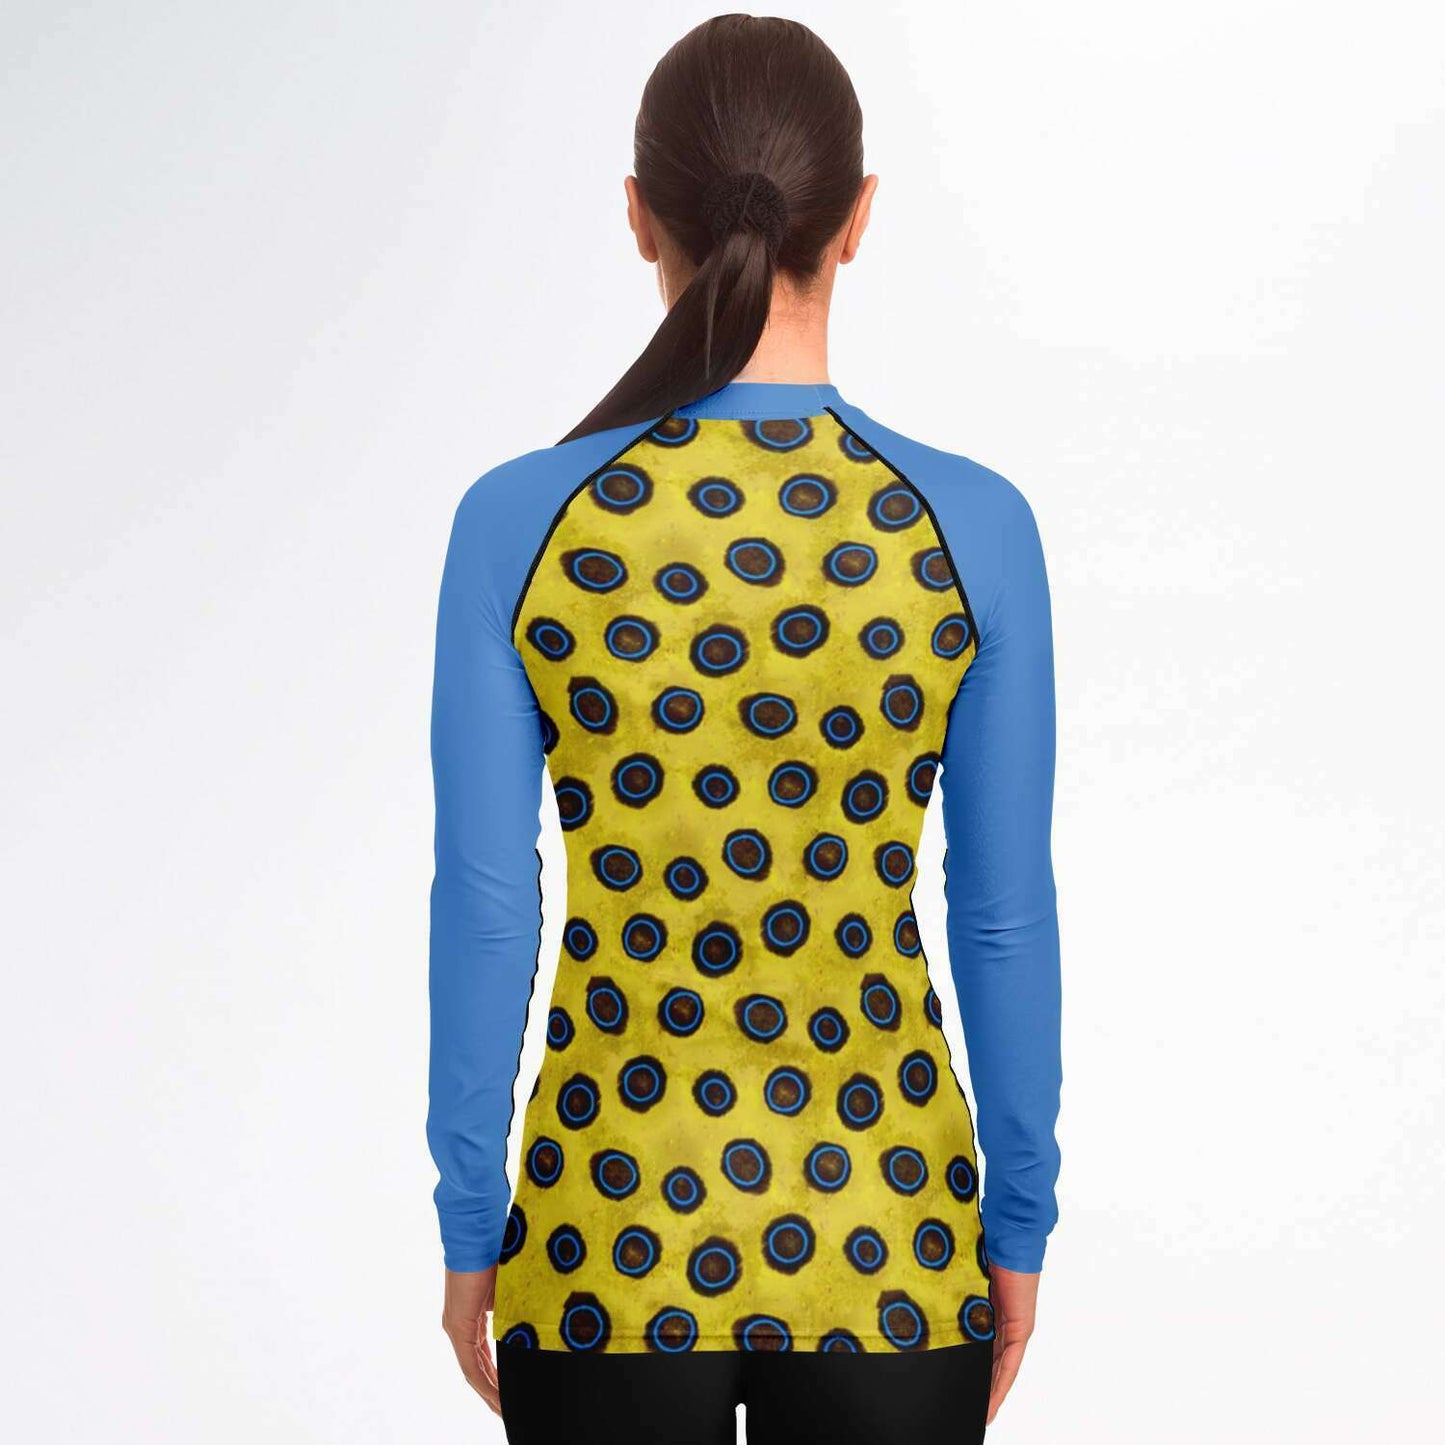 Back view of woman wearing blue-ringed octopus rash guard